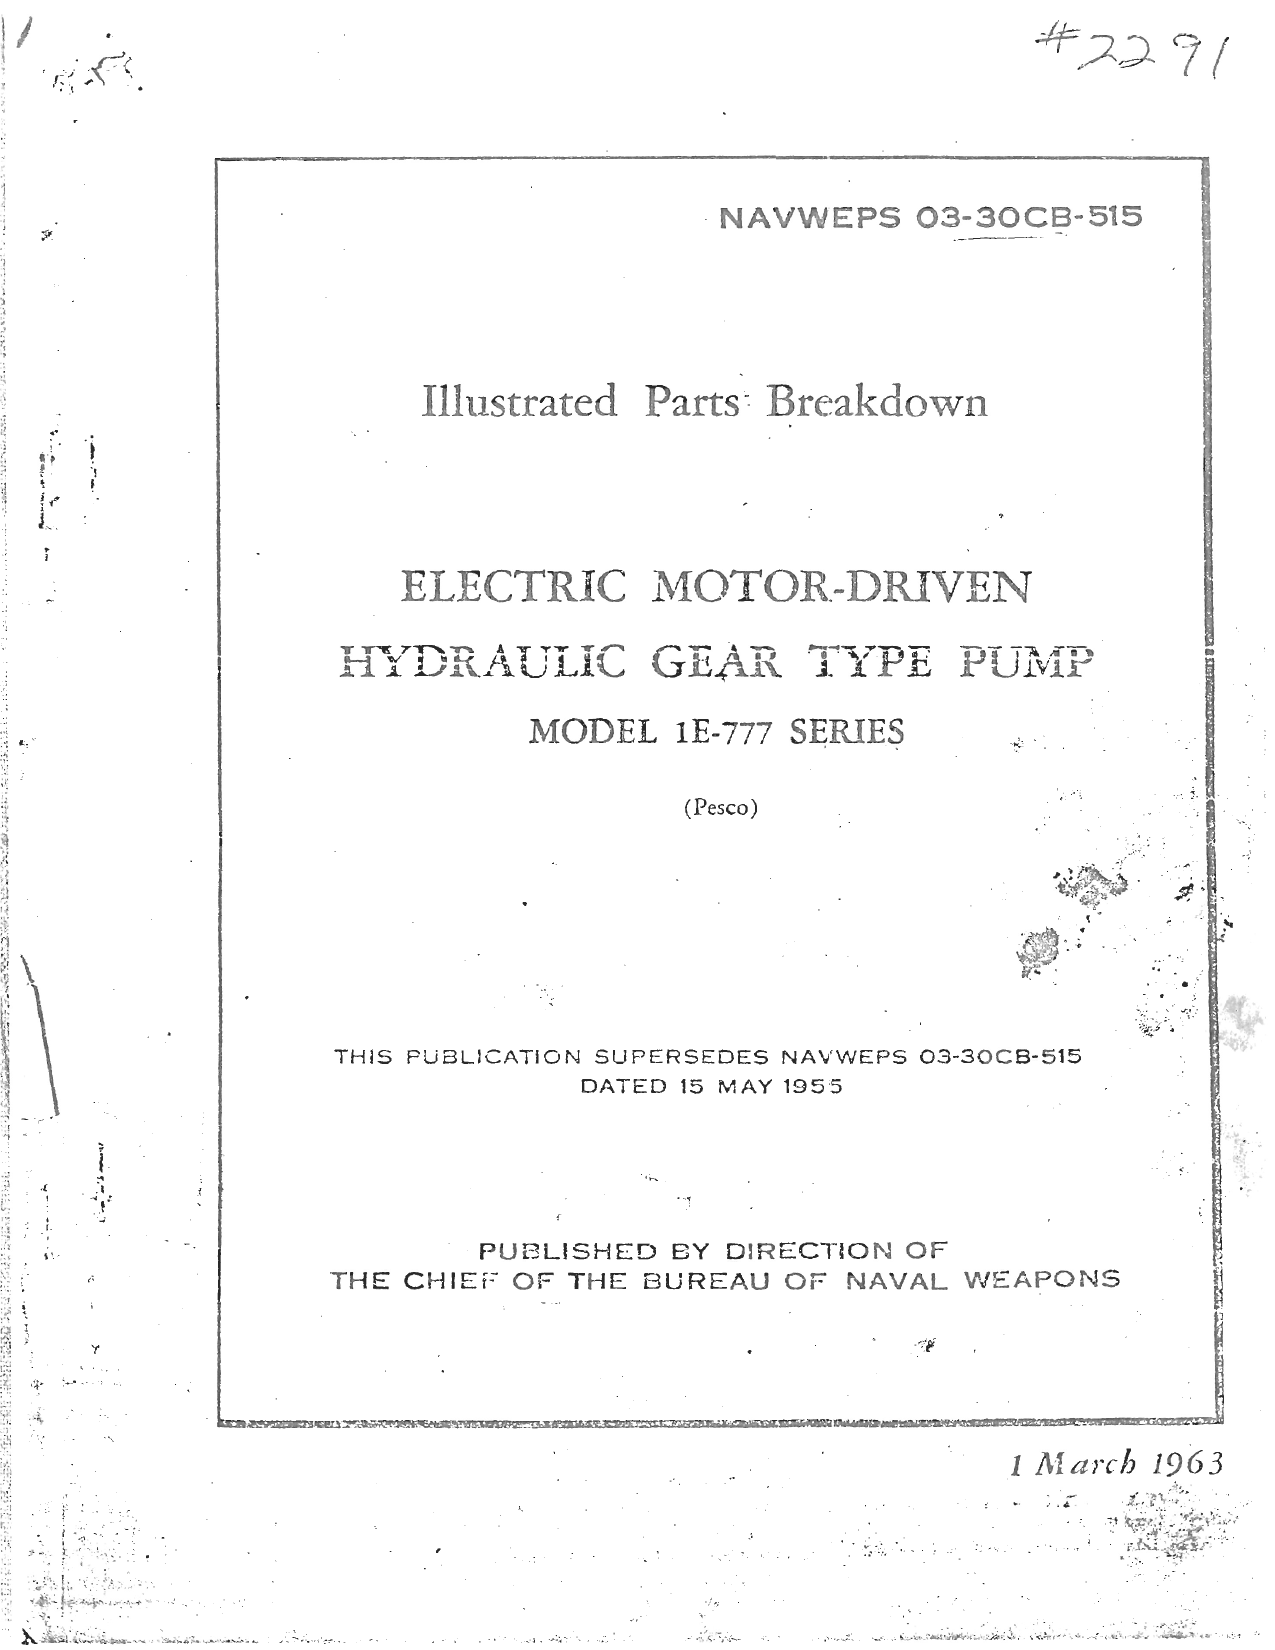 Sample page 1 from AirCorps Library document: Electric Motor Driven Hydraulic Gear Type Pump - Model 1E-777 Series 